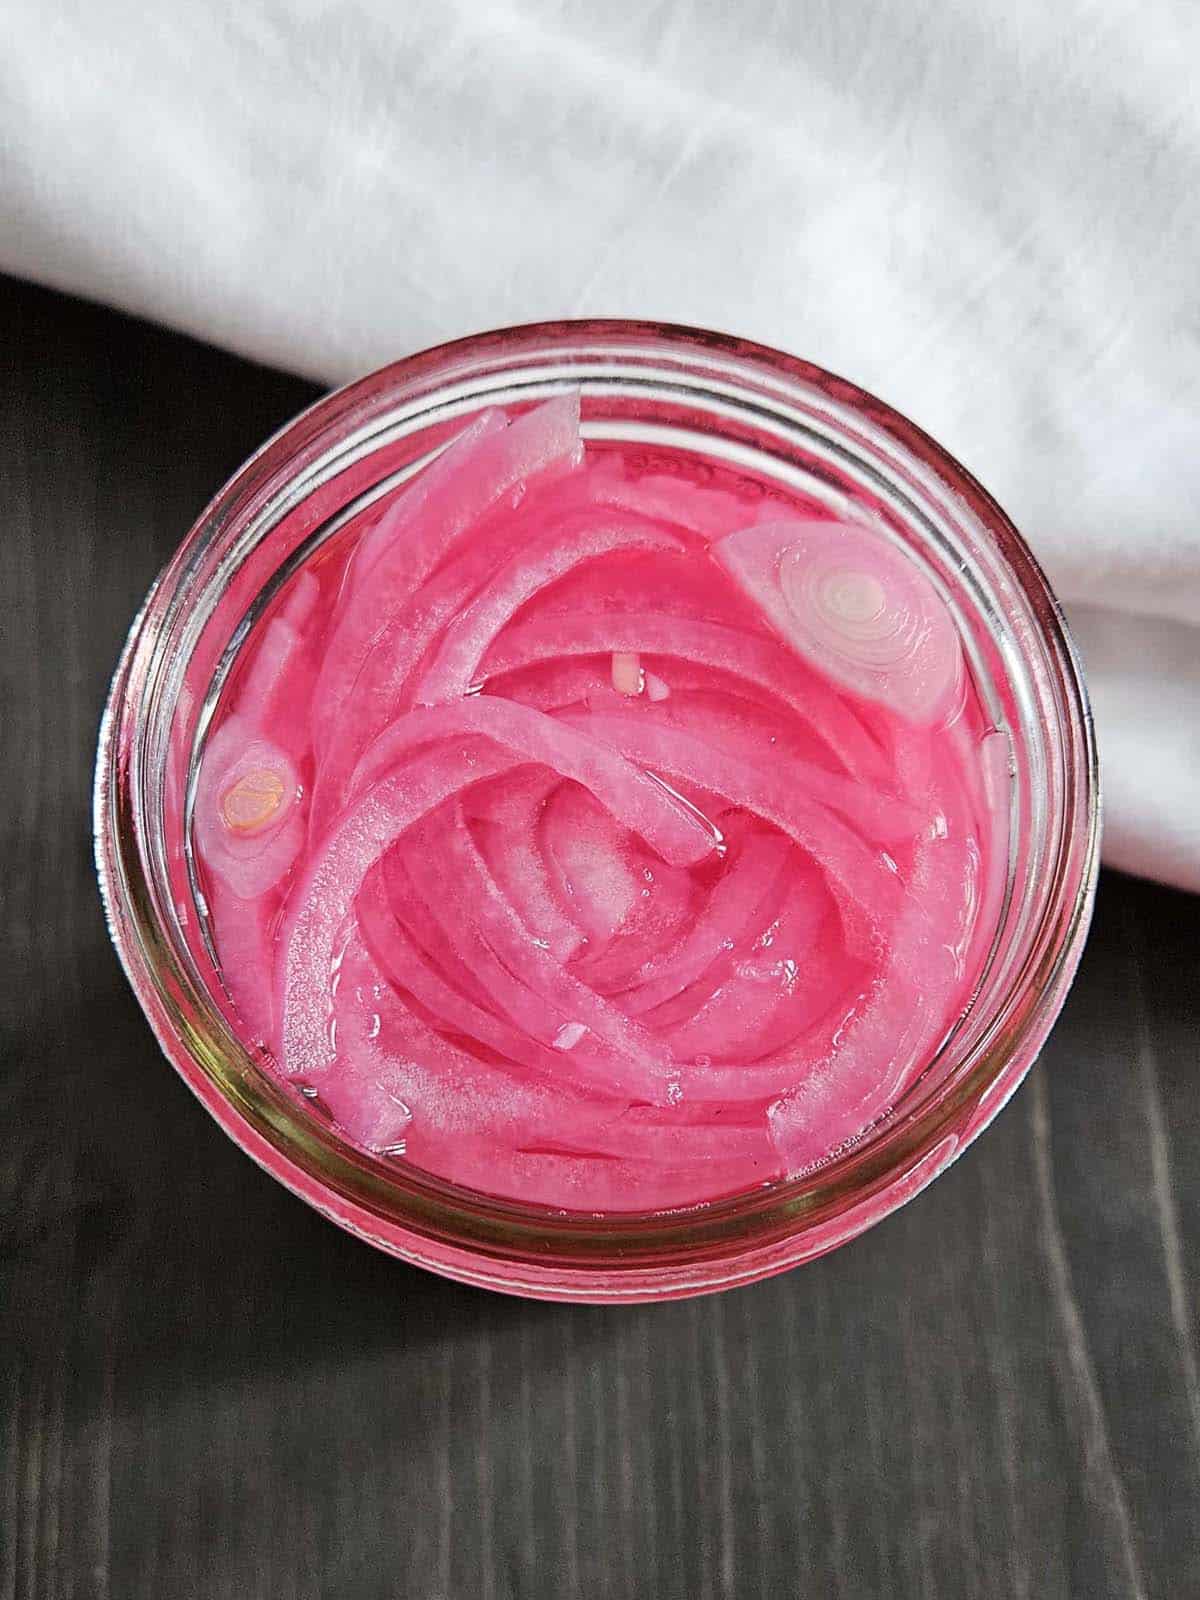 Top down view of pickled onions in a glass jar.